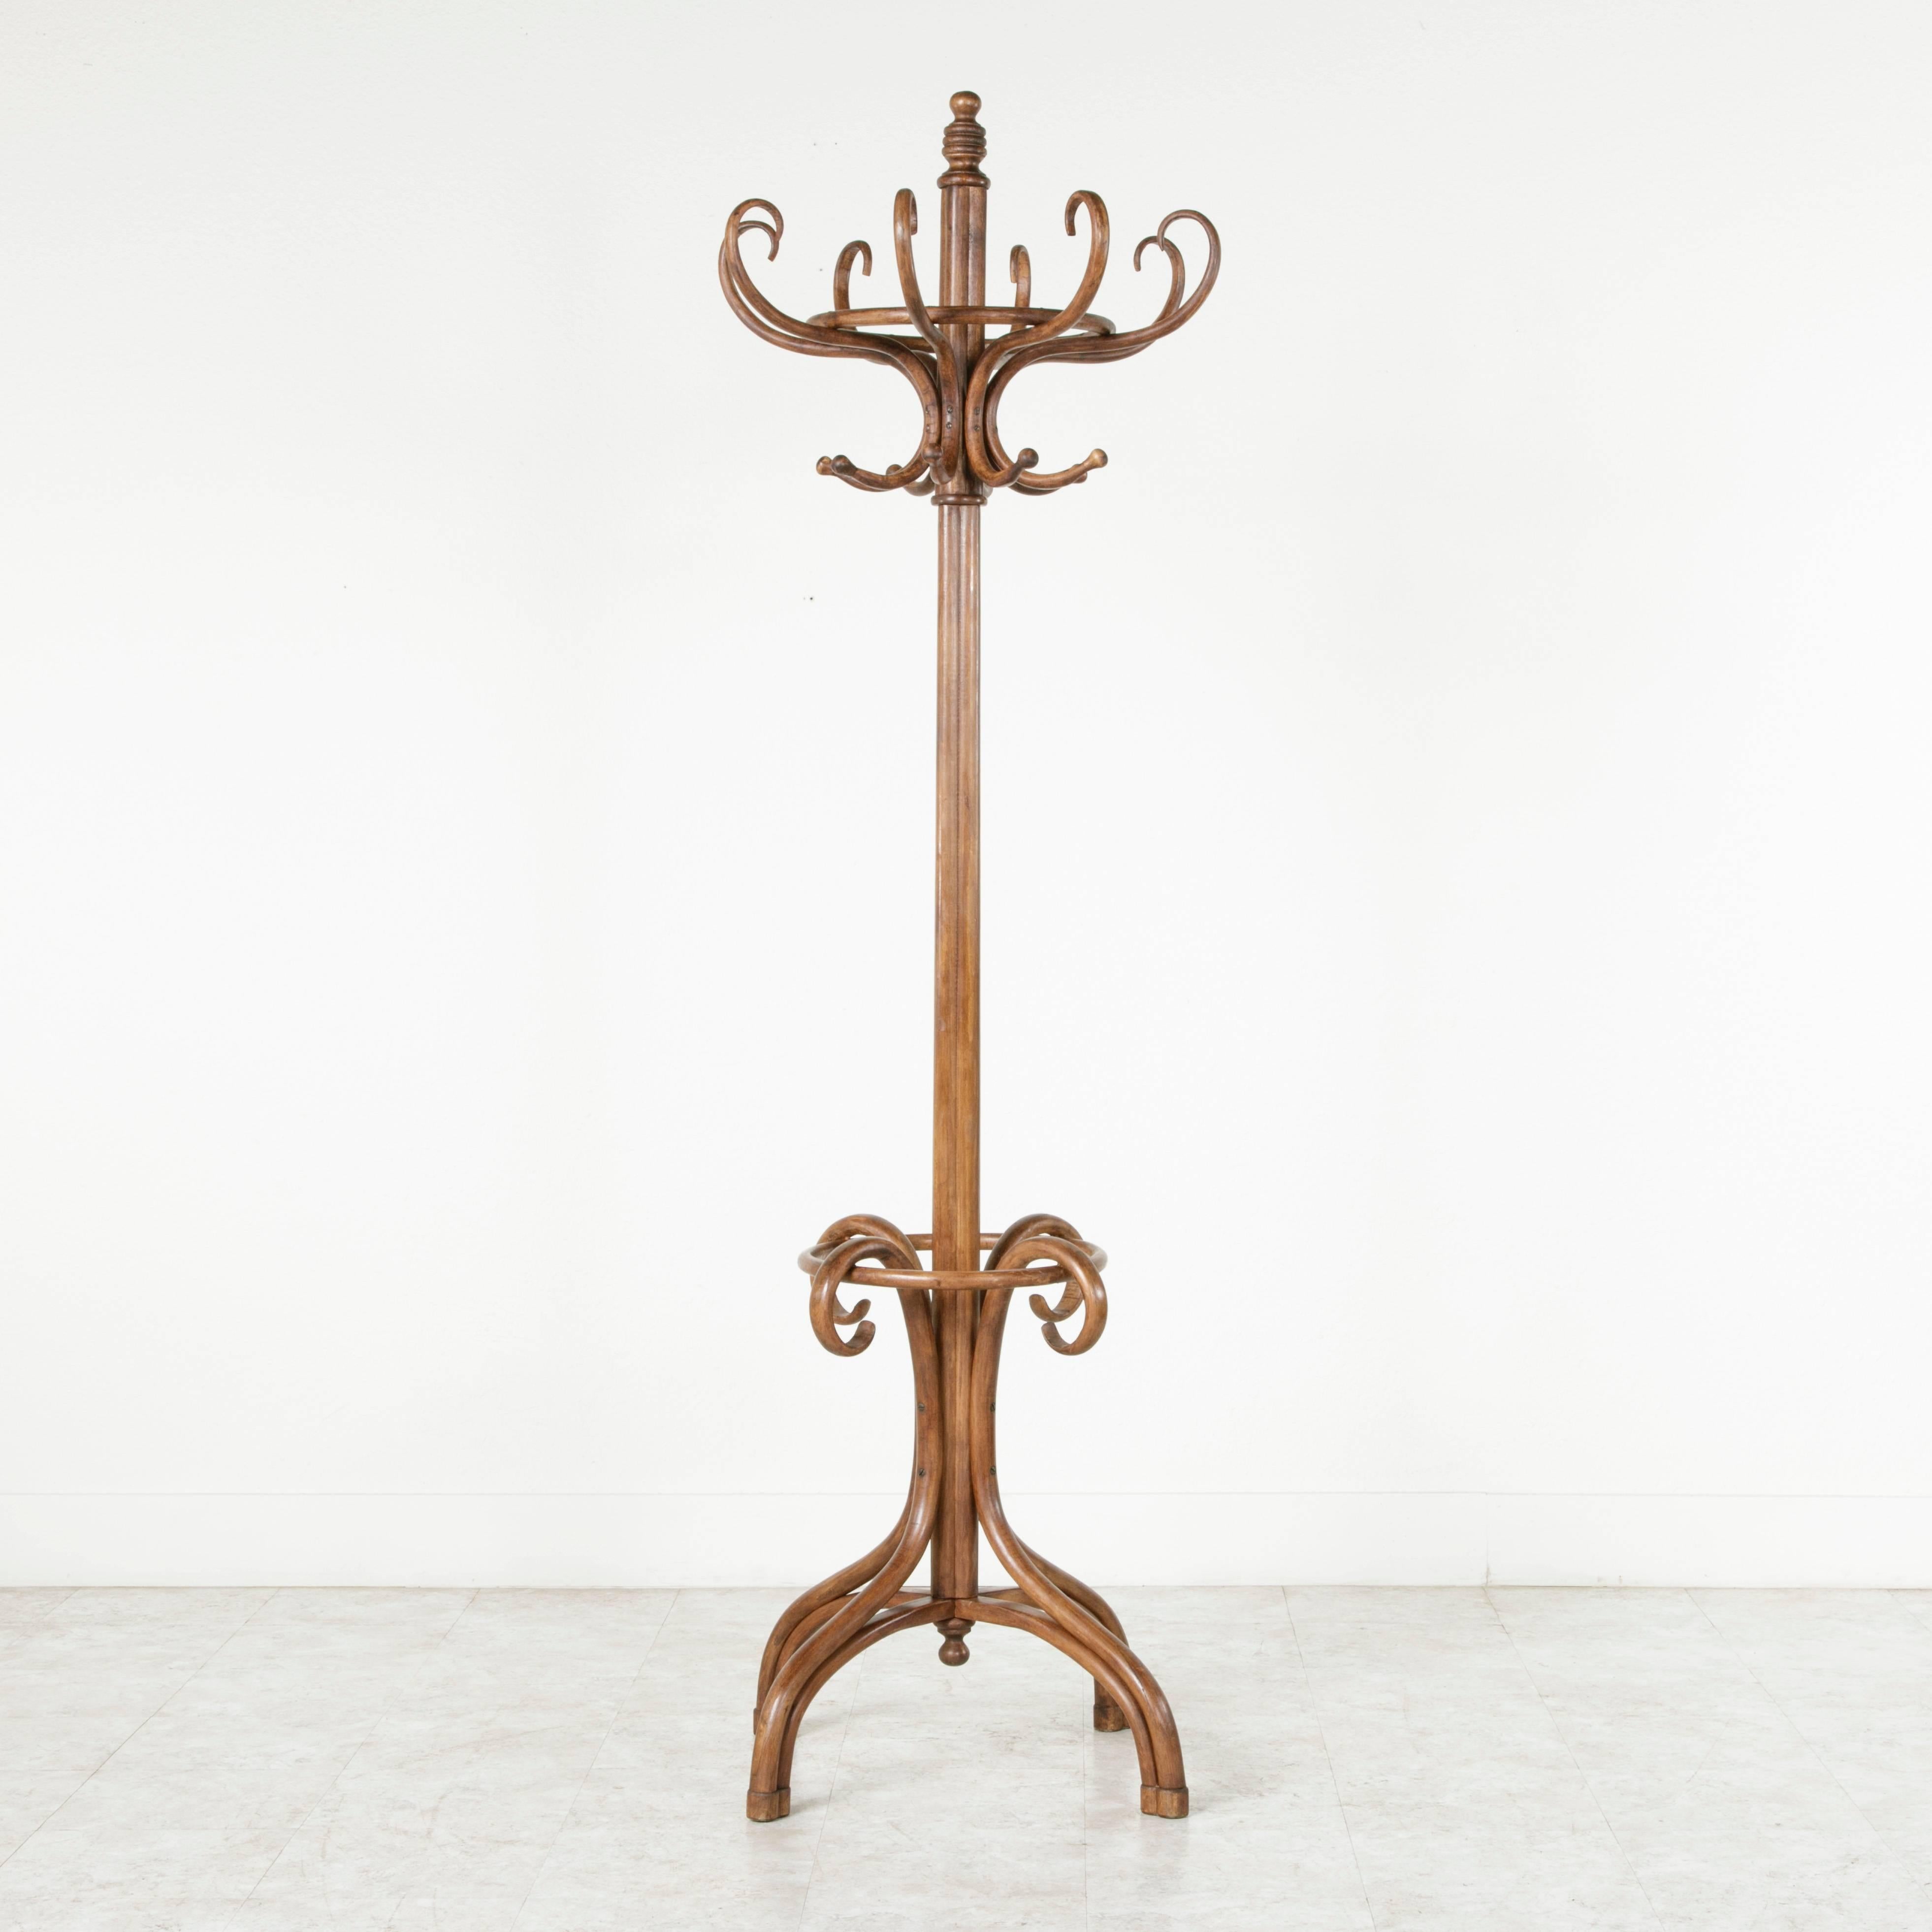 This classic Thonet style hat and coat rack or hall tree is made of richly finished bent beechwood. It features sixteen hat and coat hooks and an umbrella holder below.  A familiar fixture in the turn-of-the-century French bistro, this piece will